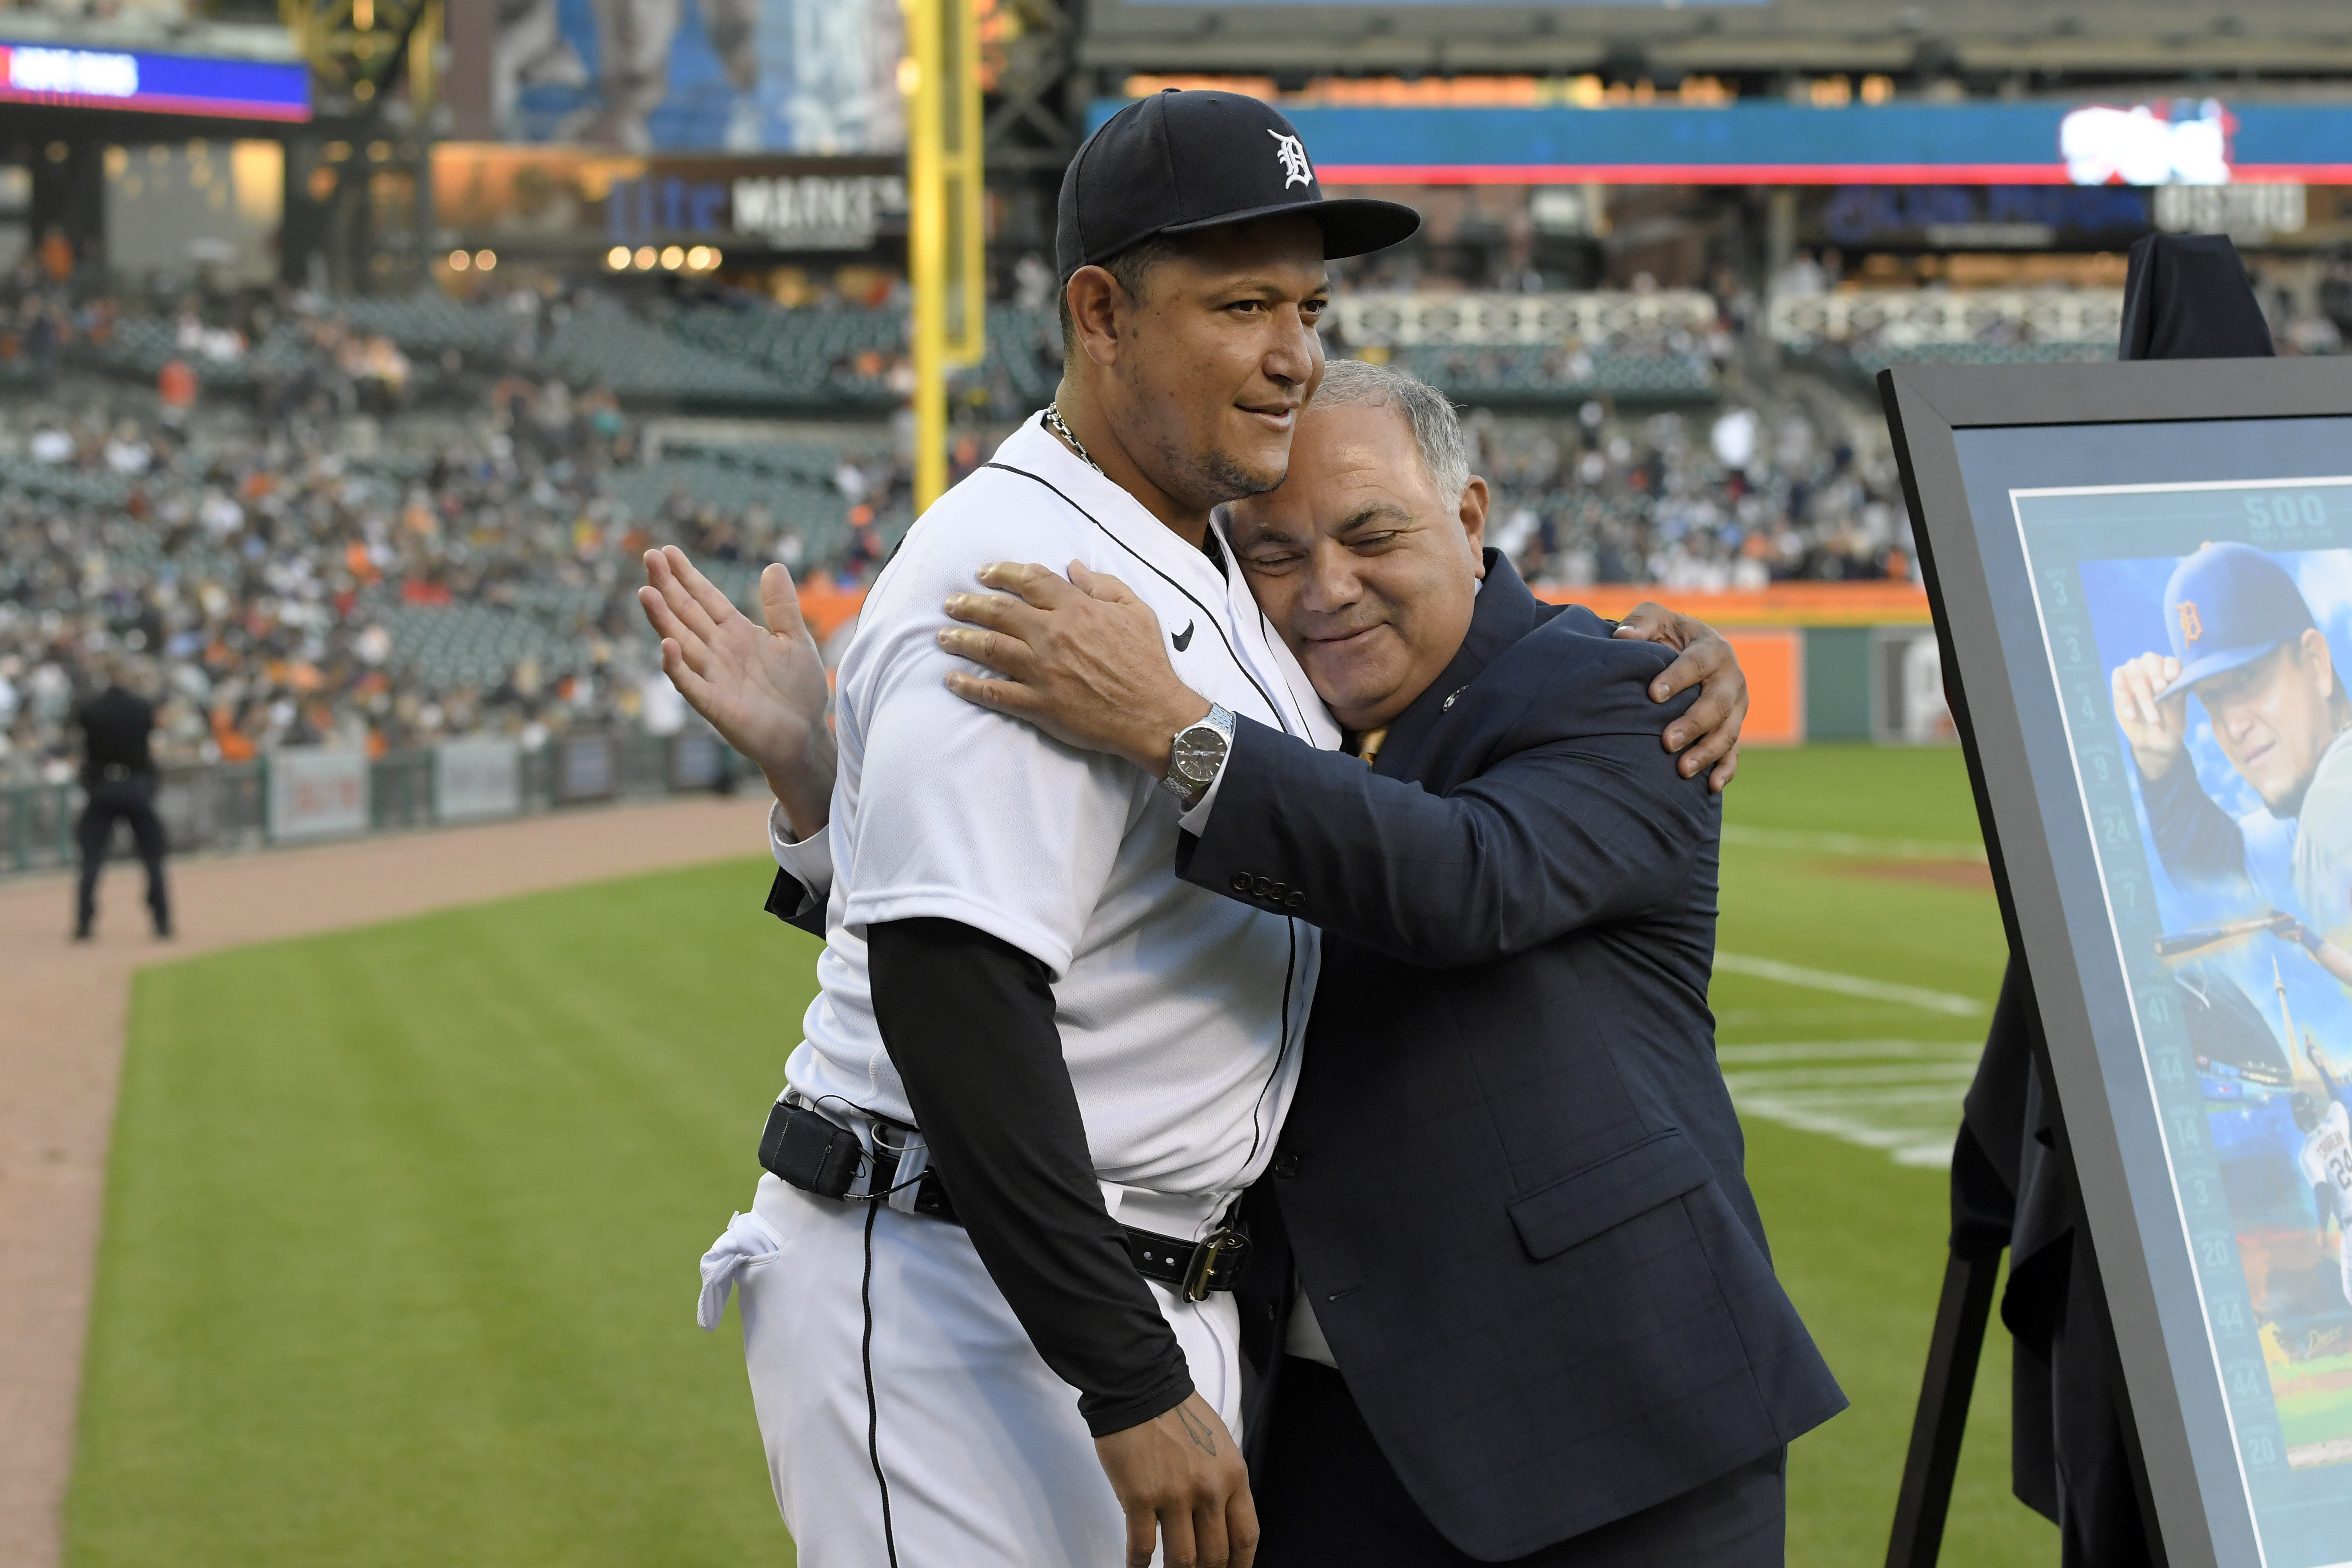 Miguel Cabrera insists he will return to Tigers in 2023